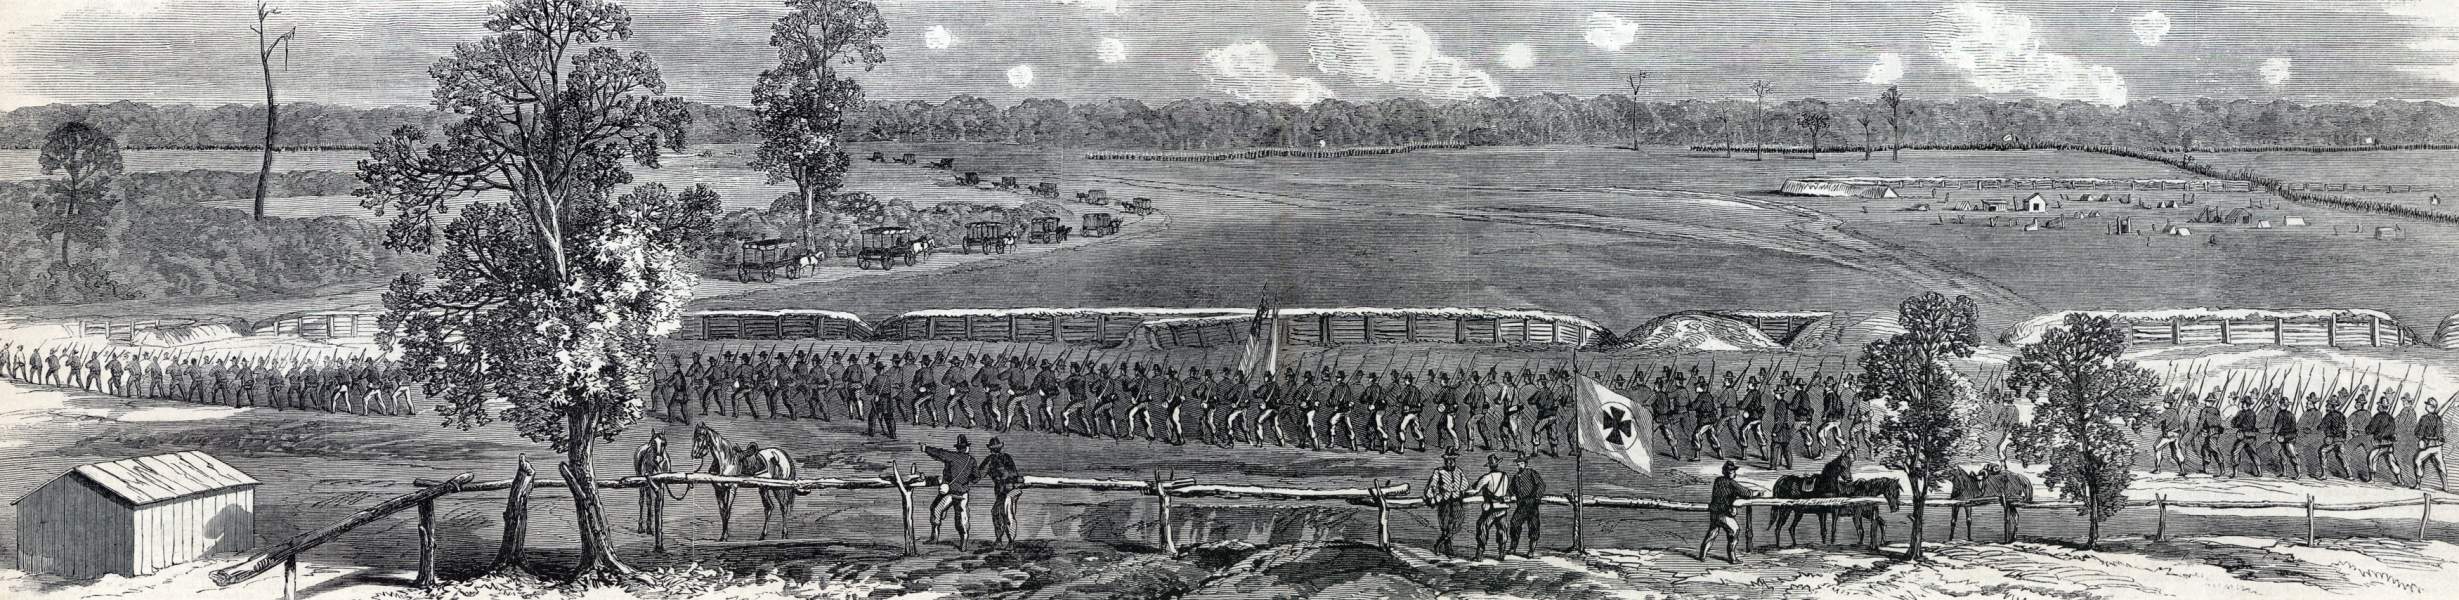 Union Army advance, Battle of Poplar Spring Church, Virginia, September 30, 1864, artist's impression, zoomable image